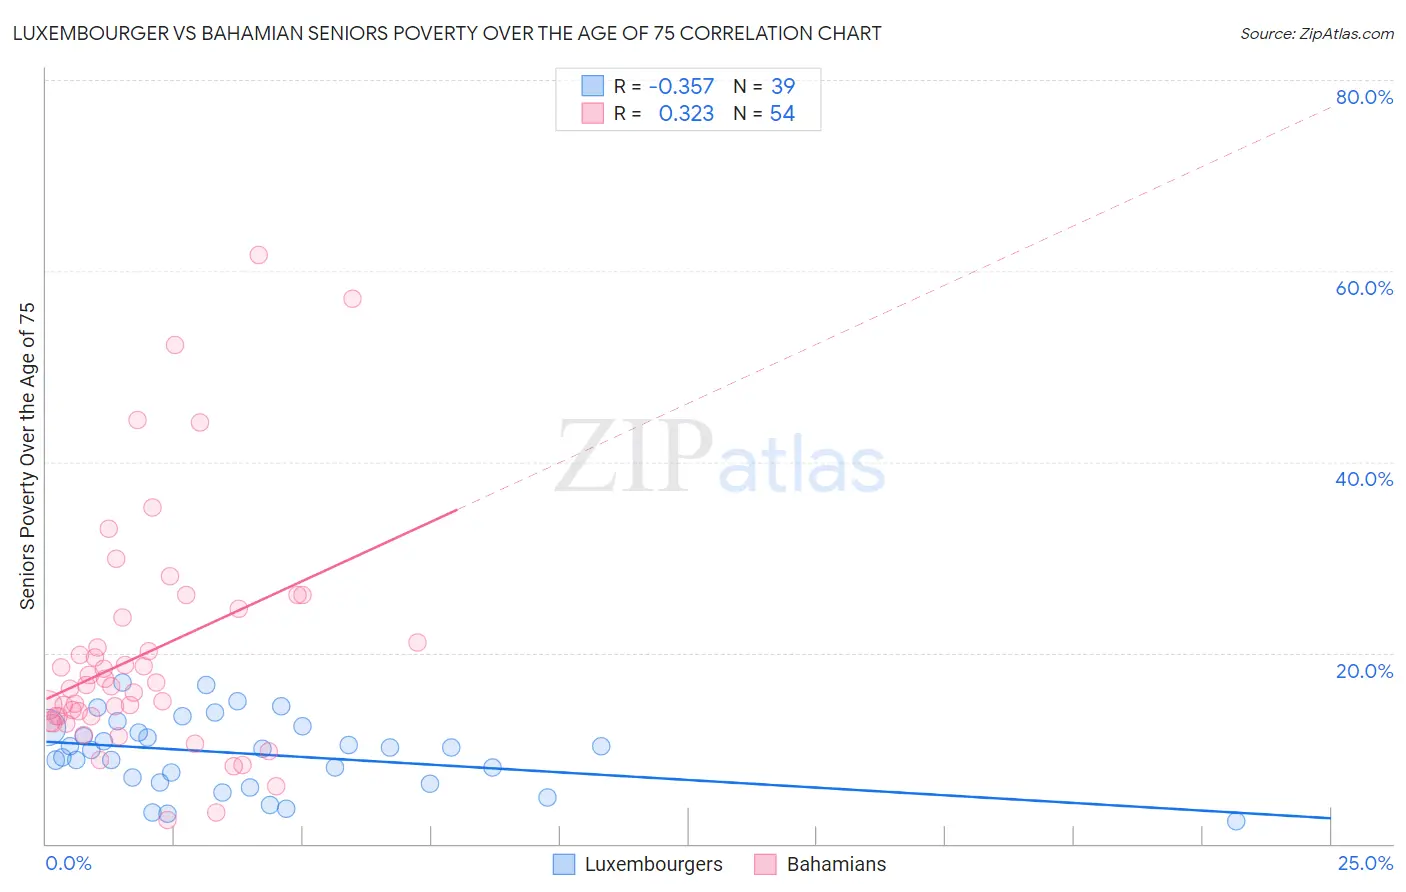 Luxembourger vs Bahamian Seniors Poverty Over the Age of 75